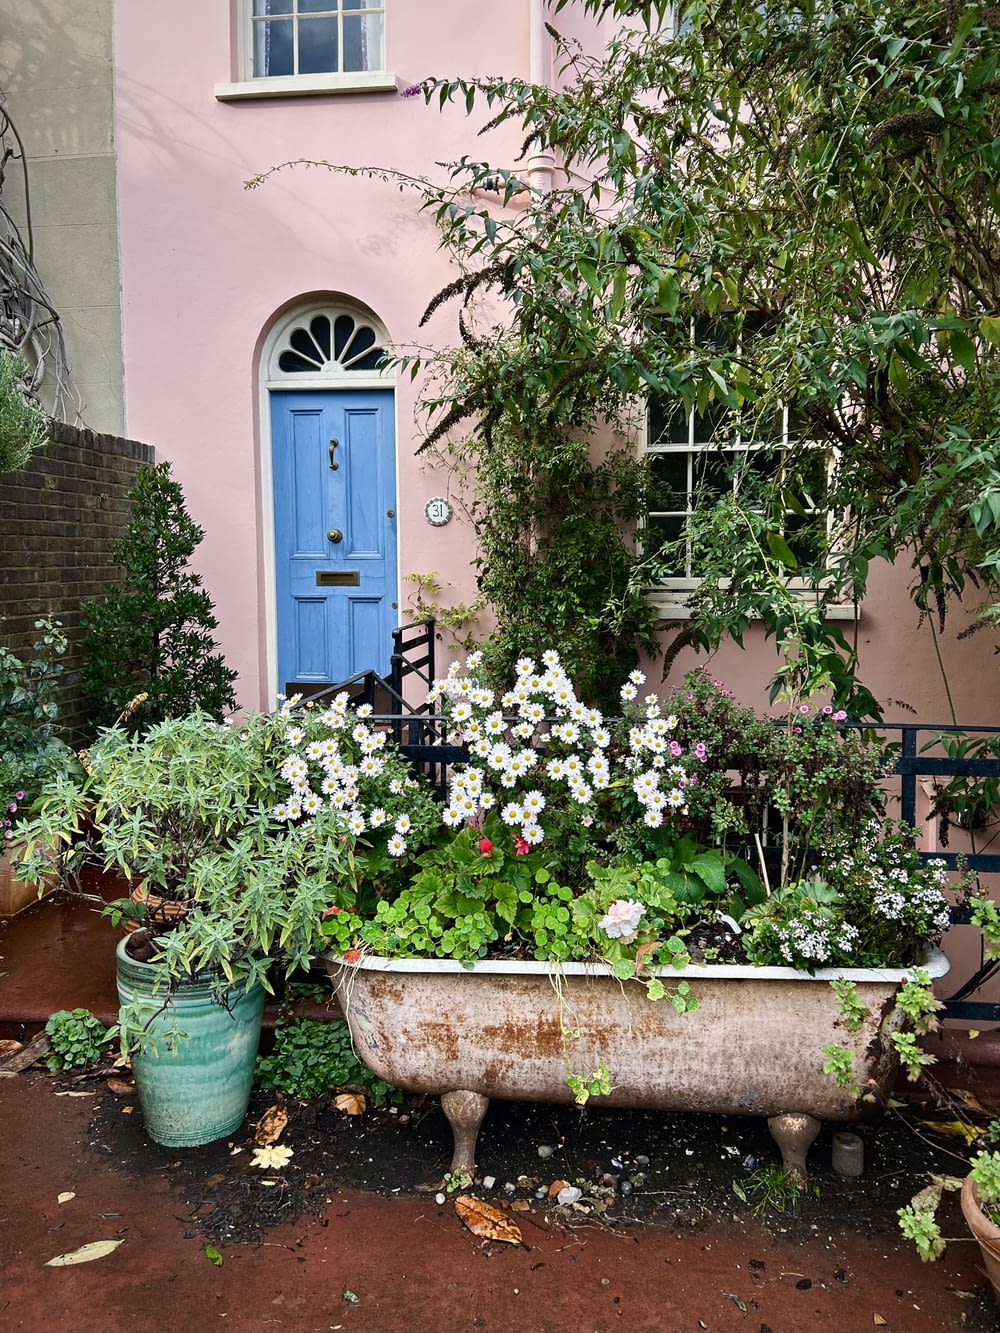 a bath tub filled with flowers next to a pink house